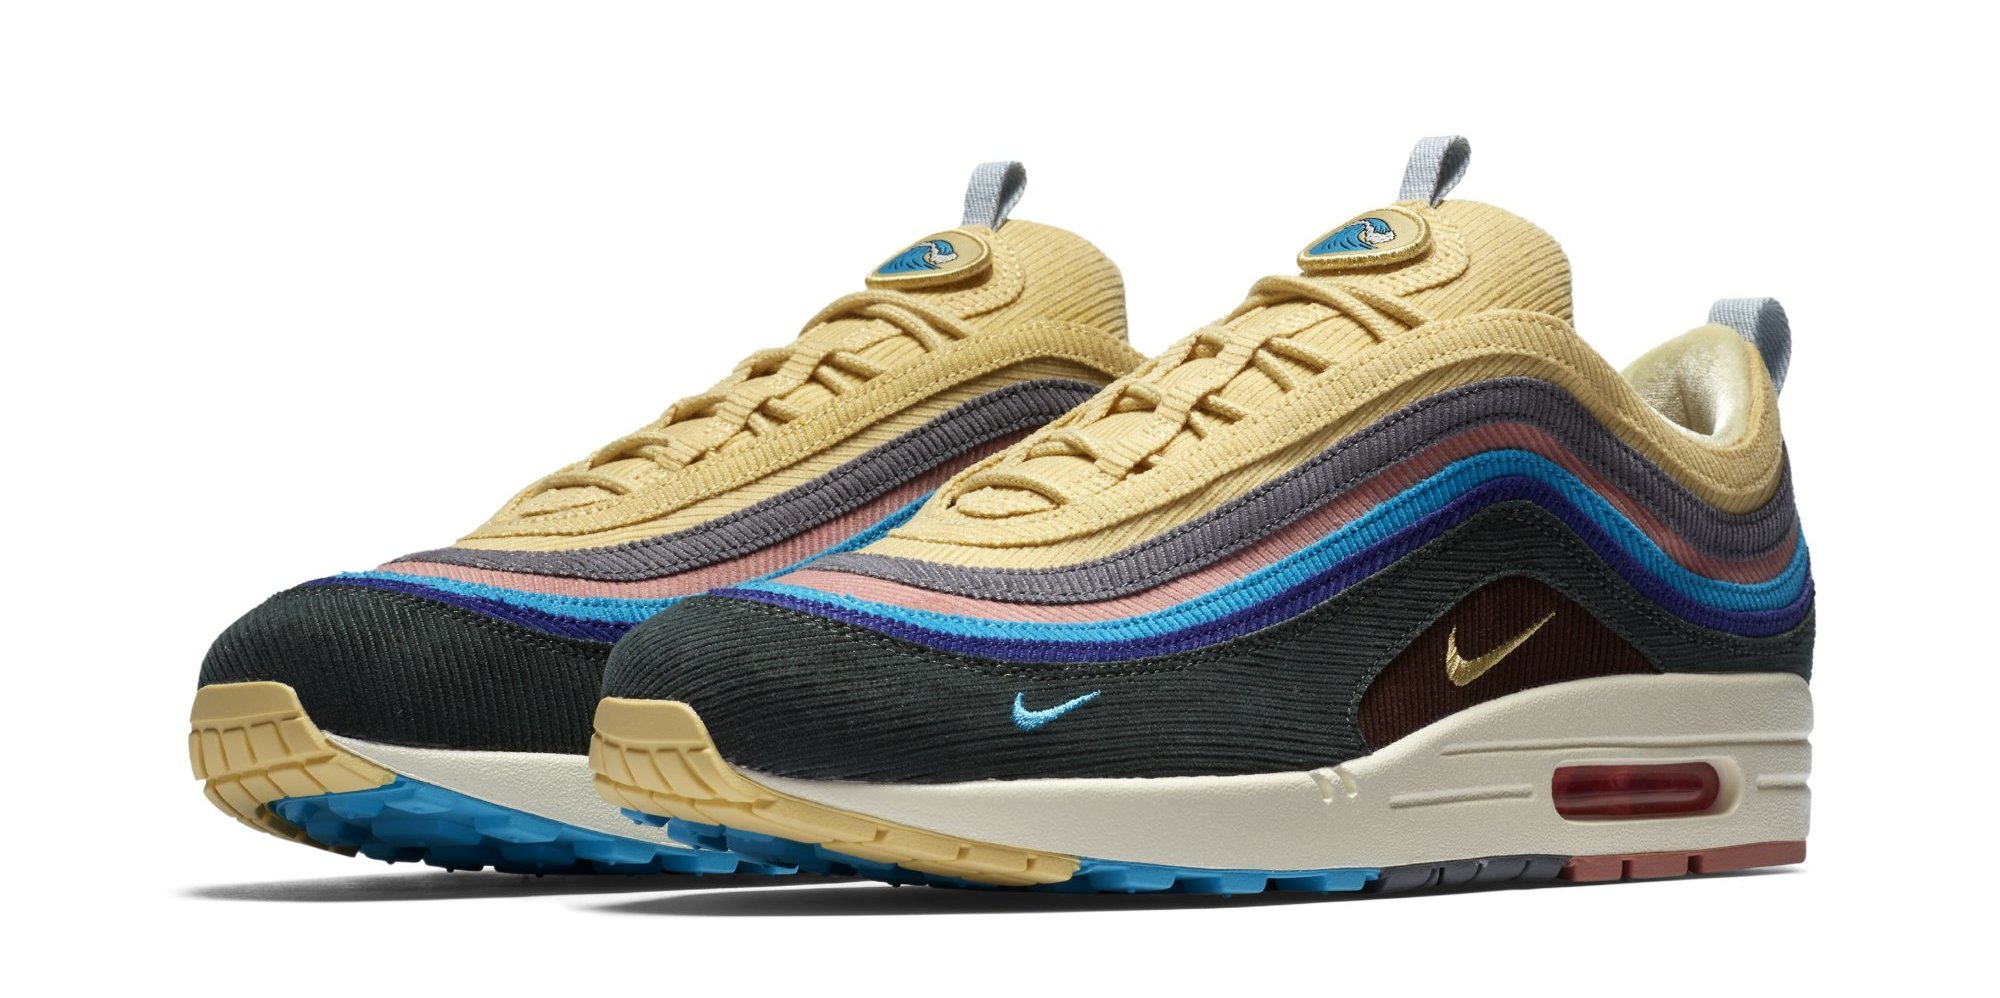 sean wotherspoon air max 97 v2 